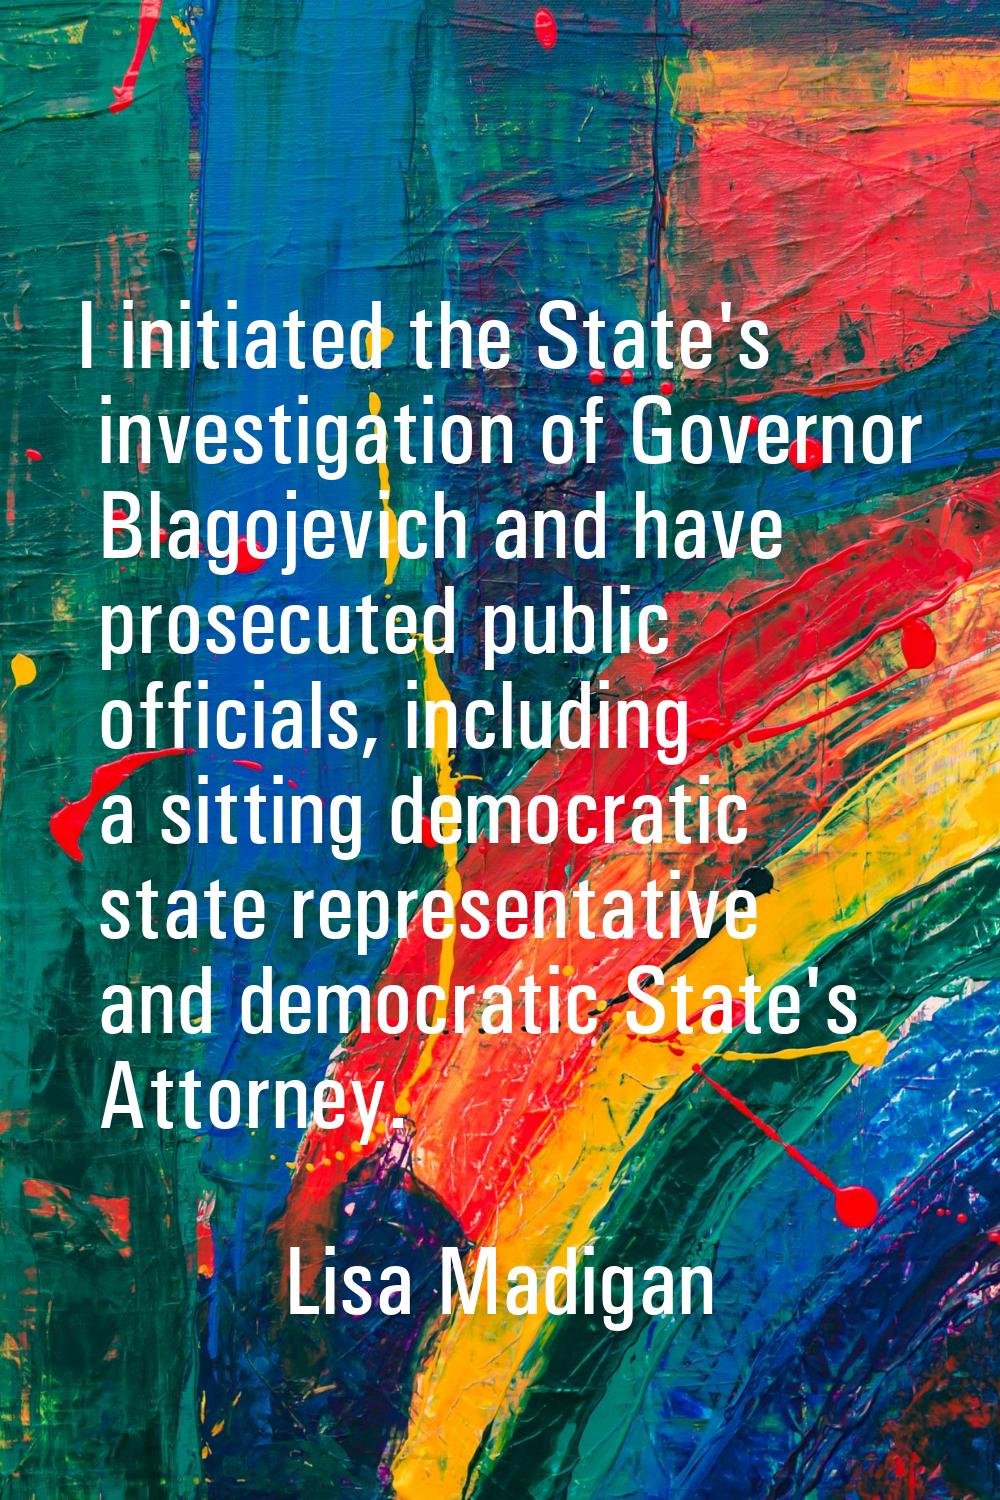 I initiated the State's investigation of Governor Blagojevich and have prosecuted public officials,